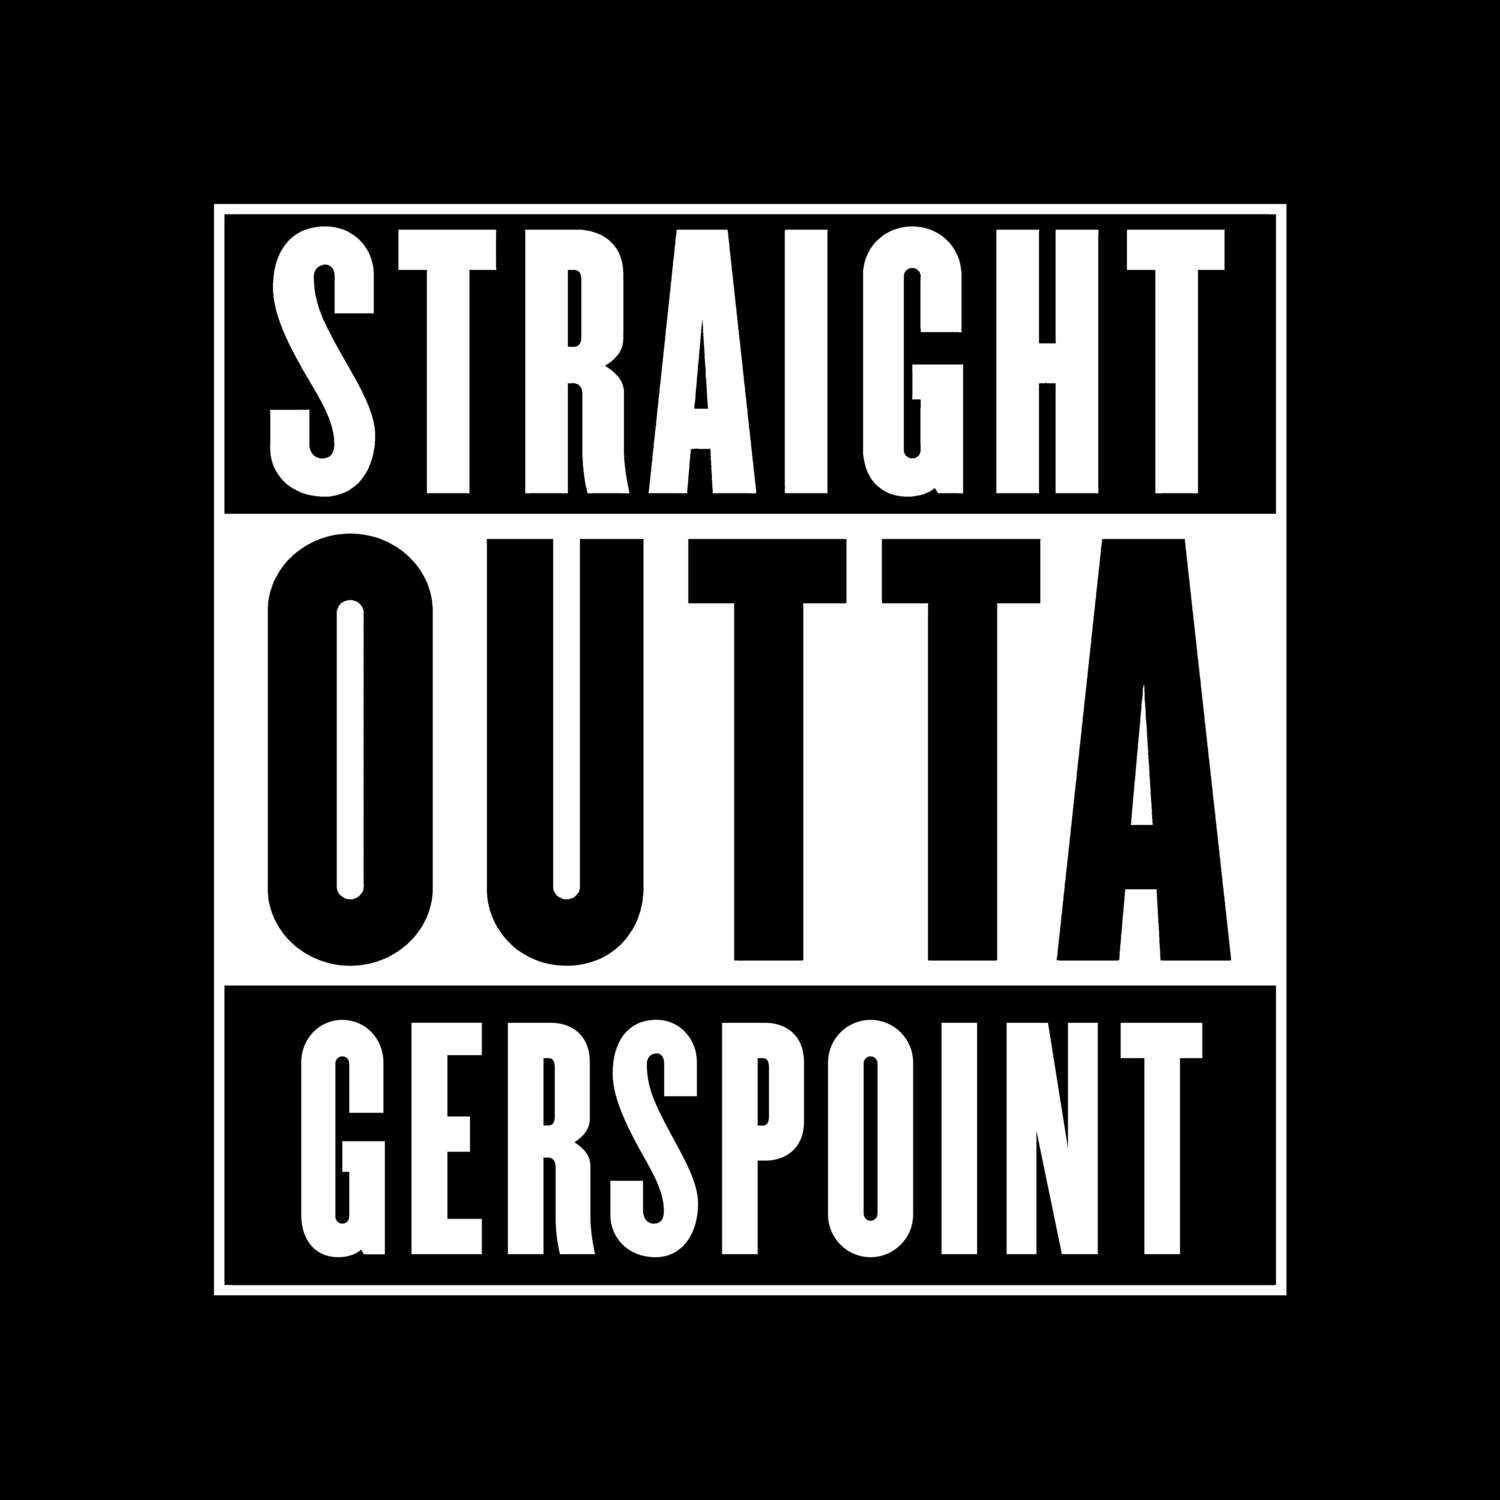 Gerspoint T-Shirt »Straight Outta«